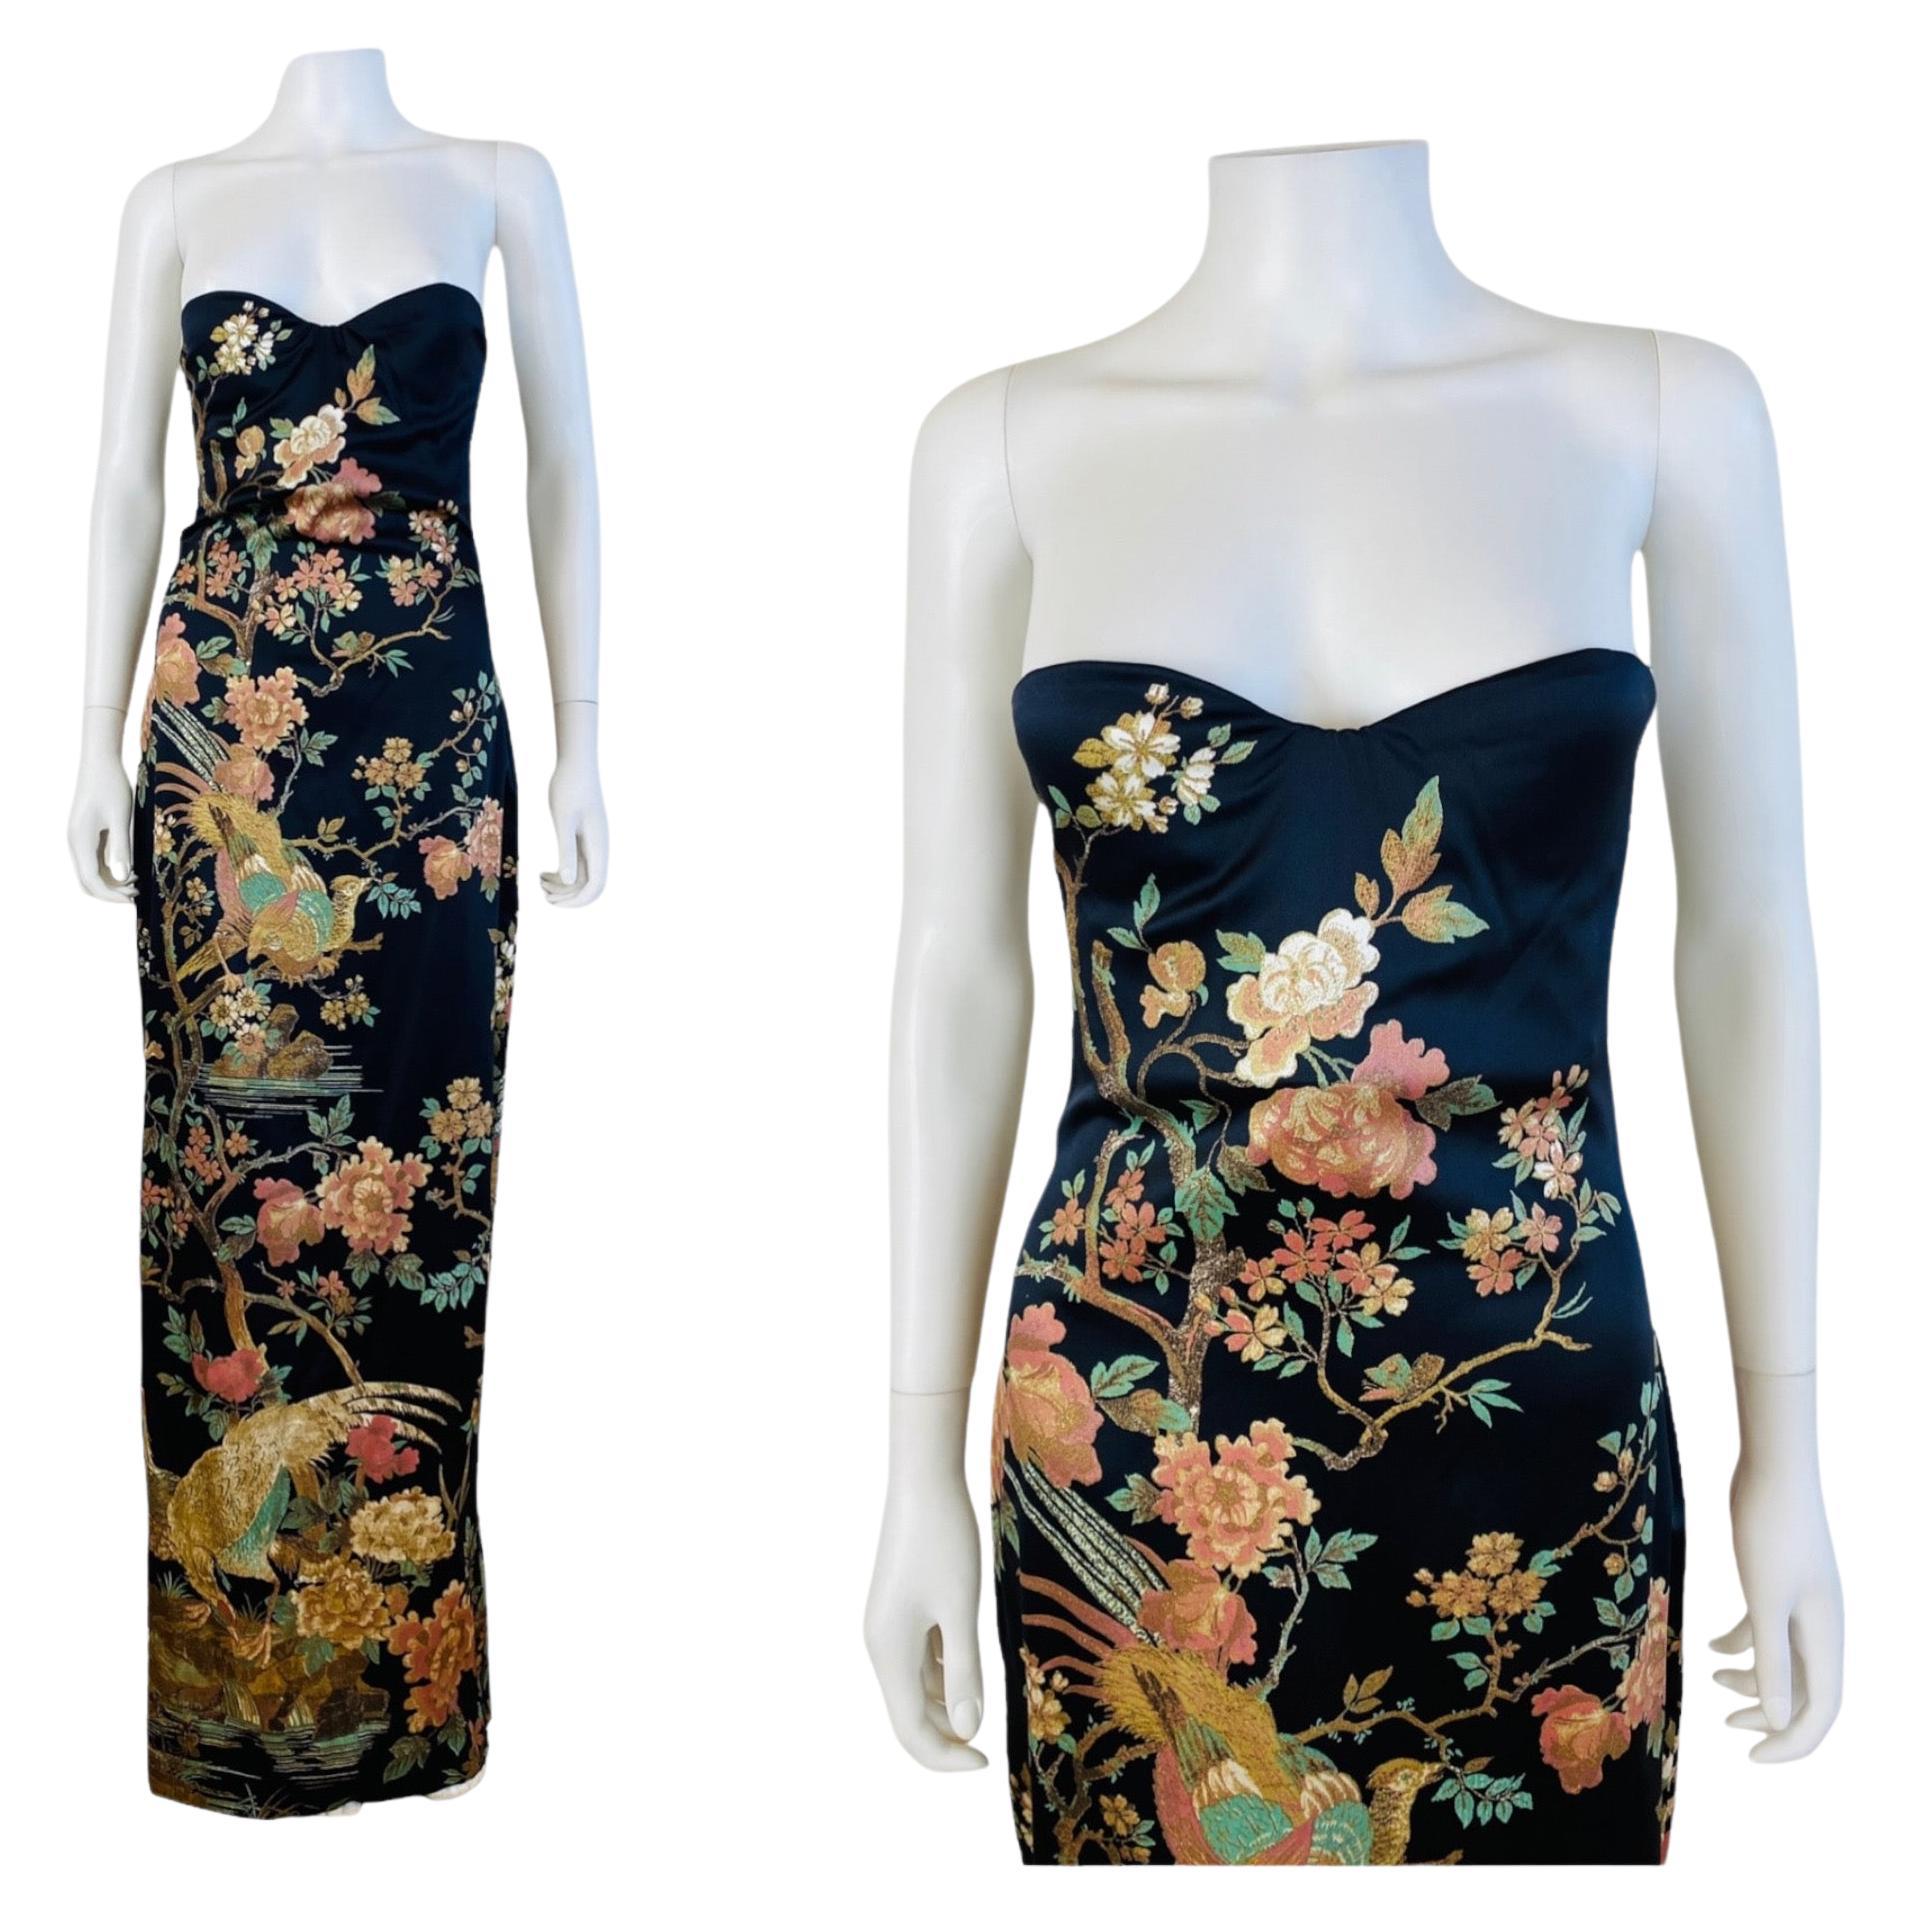 Stunning F/W 2006 Roberto Cavalli Dress with original tags (pinned to mannequin)
Black silk + elastane fabric with oversized floral + pheasant print 
Hand painted style print with gold accents
Sleeveless 
Sweetheart neckline
Bustier bra style hidden